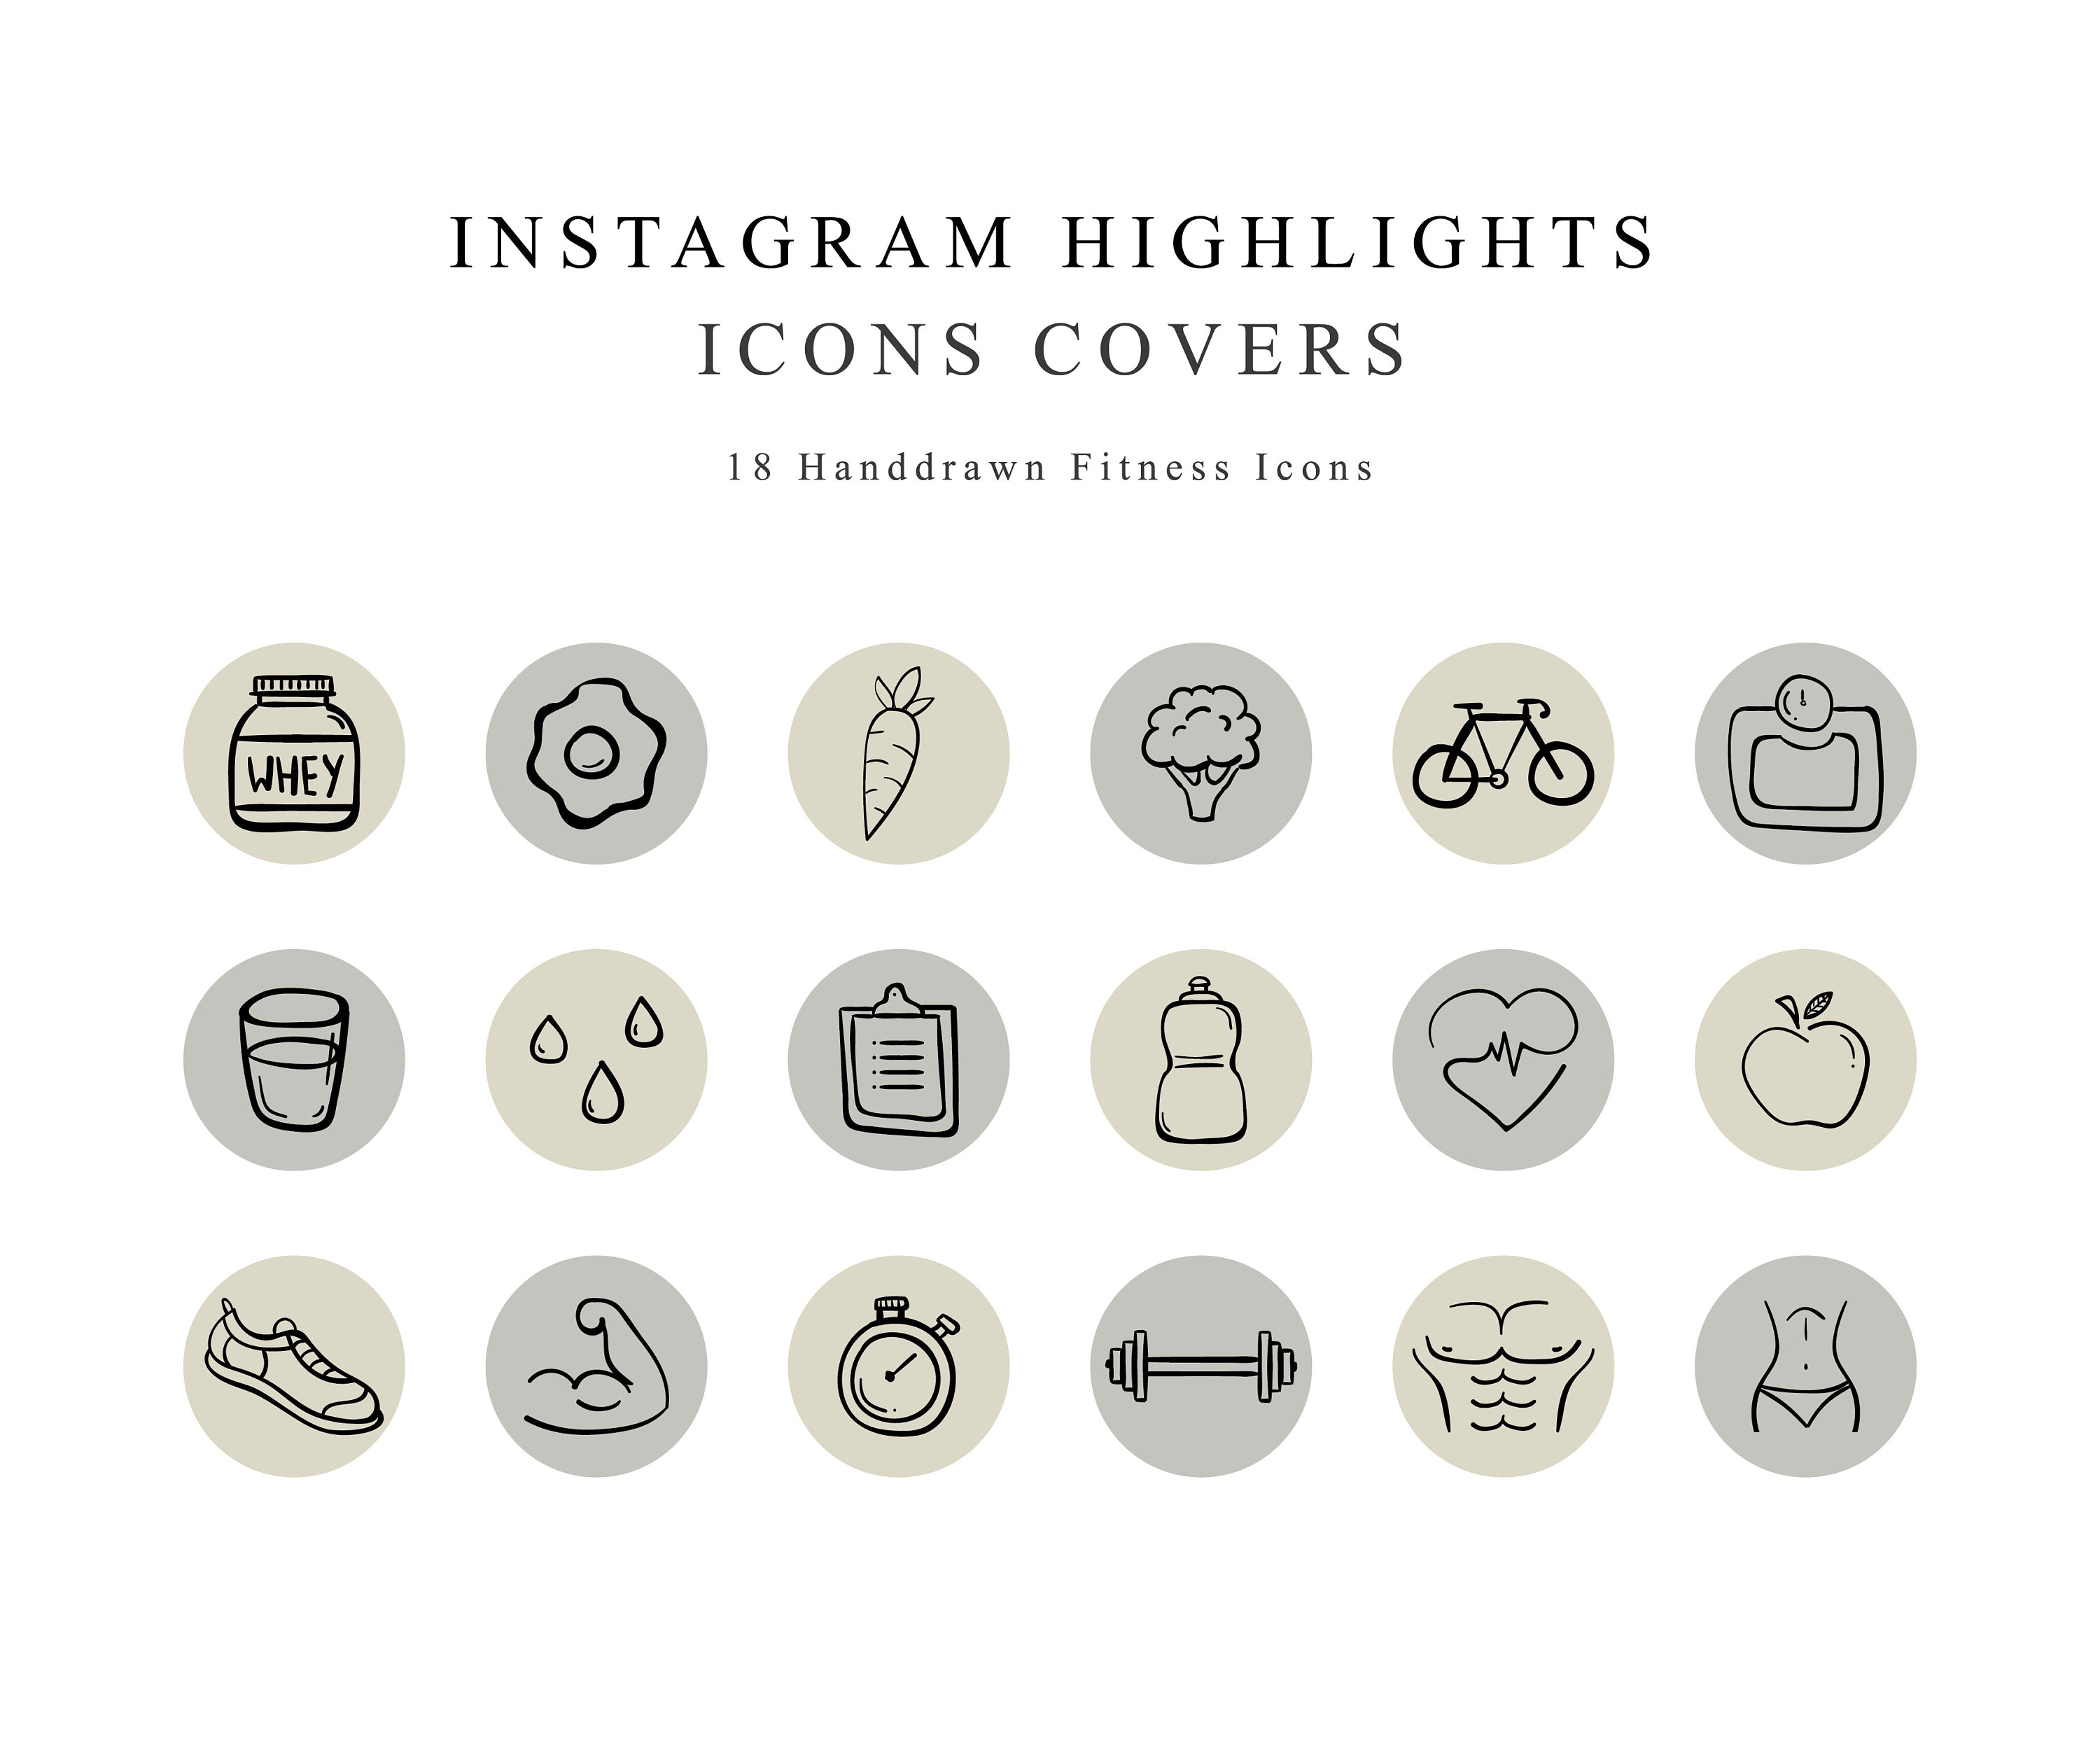 Instagram Story Highlights Cover Icons Fitness Handdrawn | Etsy